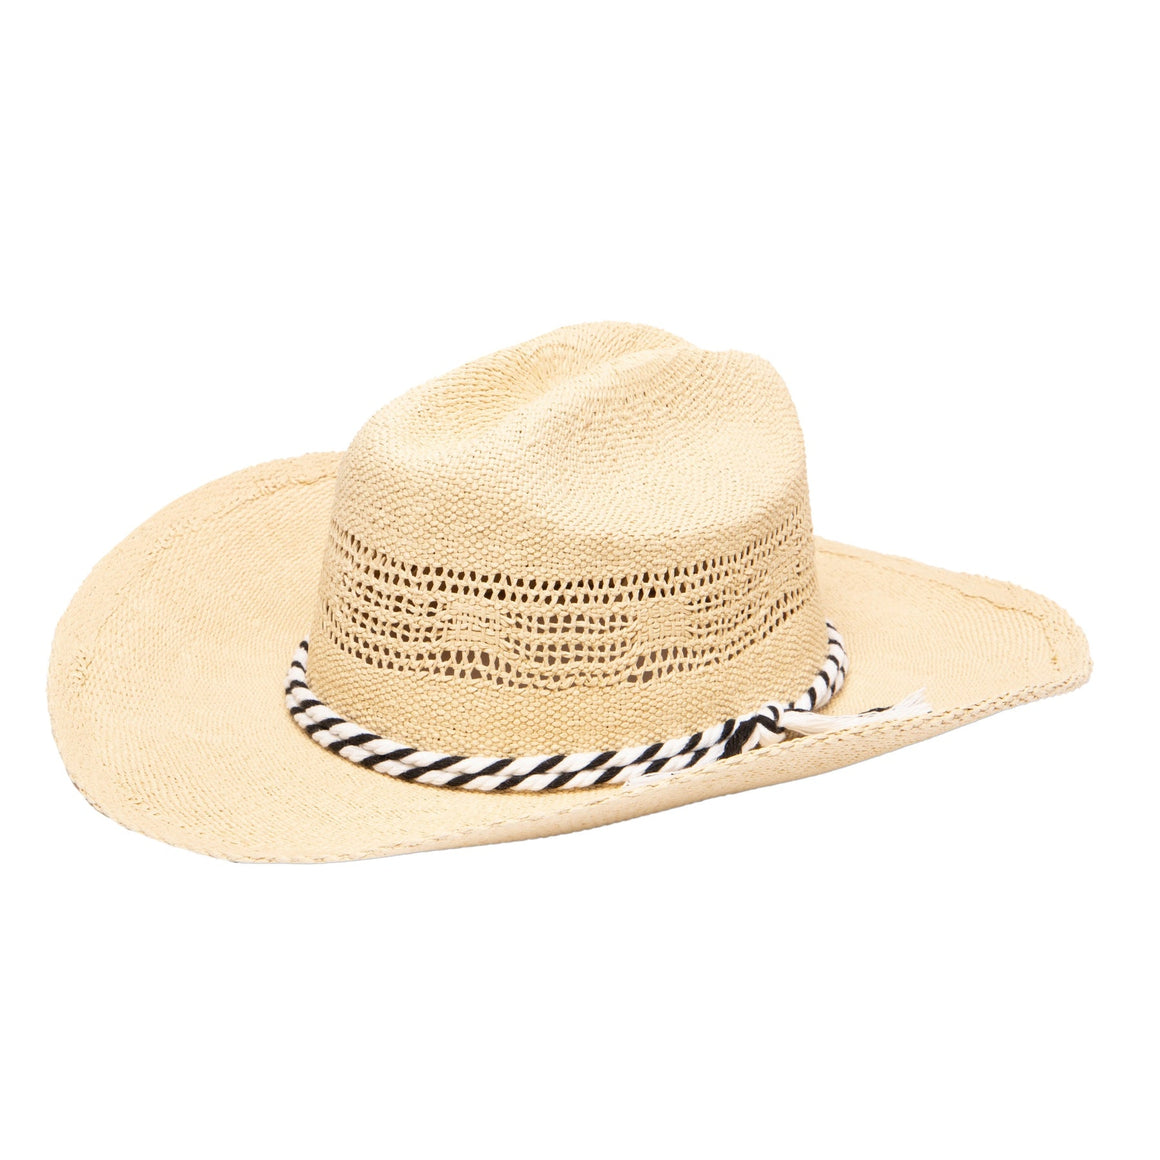 San Diego Hat Company | Women's Woven Cowboy Hat With 2 Tone Cotton Band